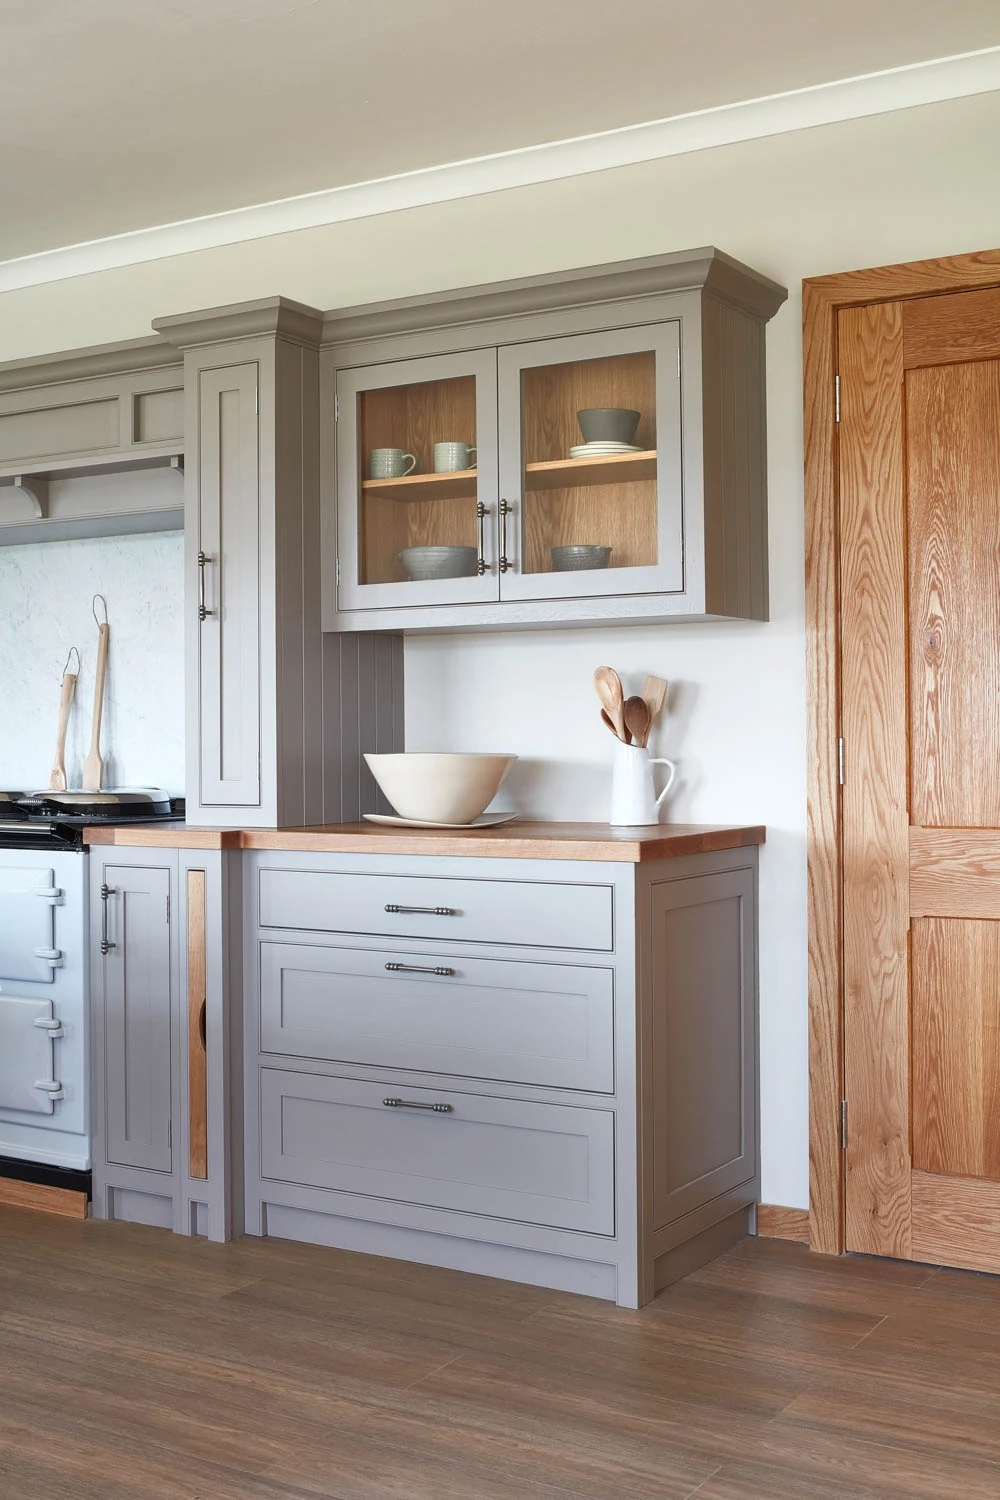 Oversized oak worktops add warmth and a luxurious touch, seamlessly tying together the traditional design and modern appliances.